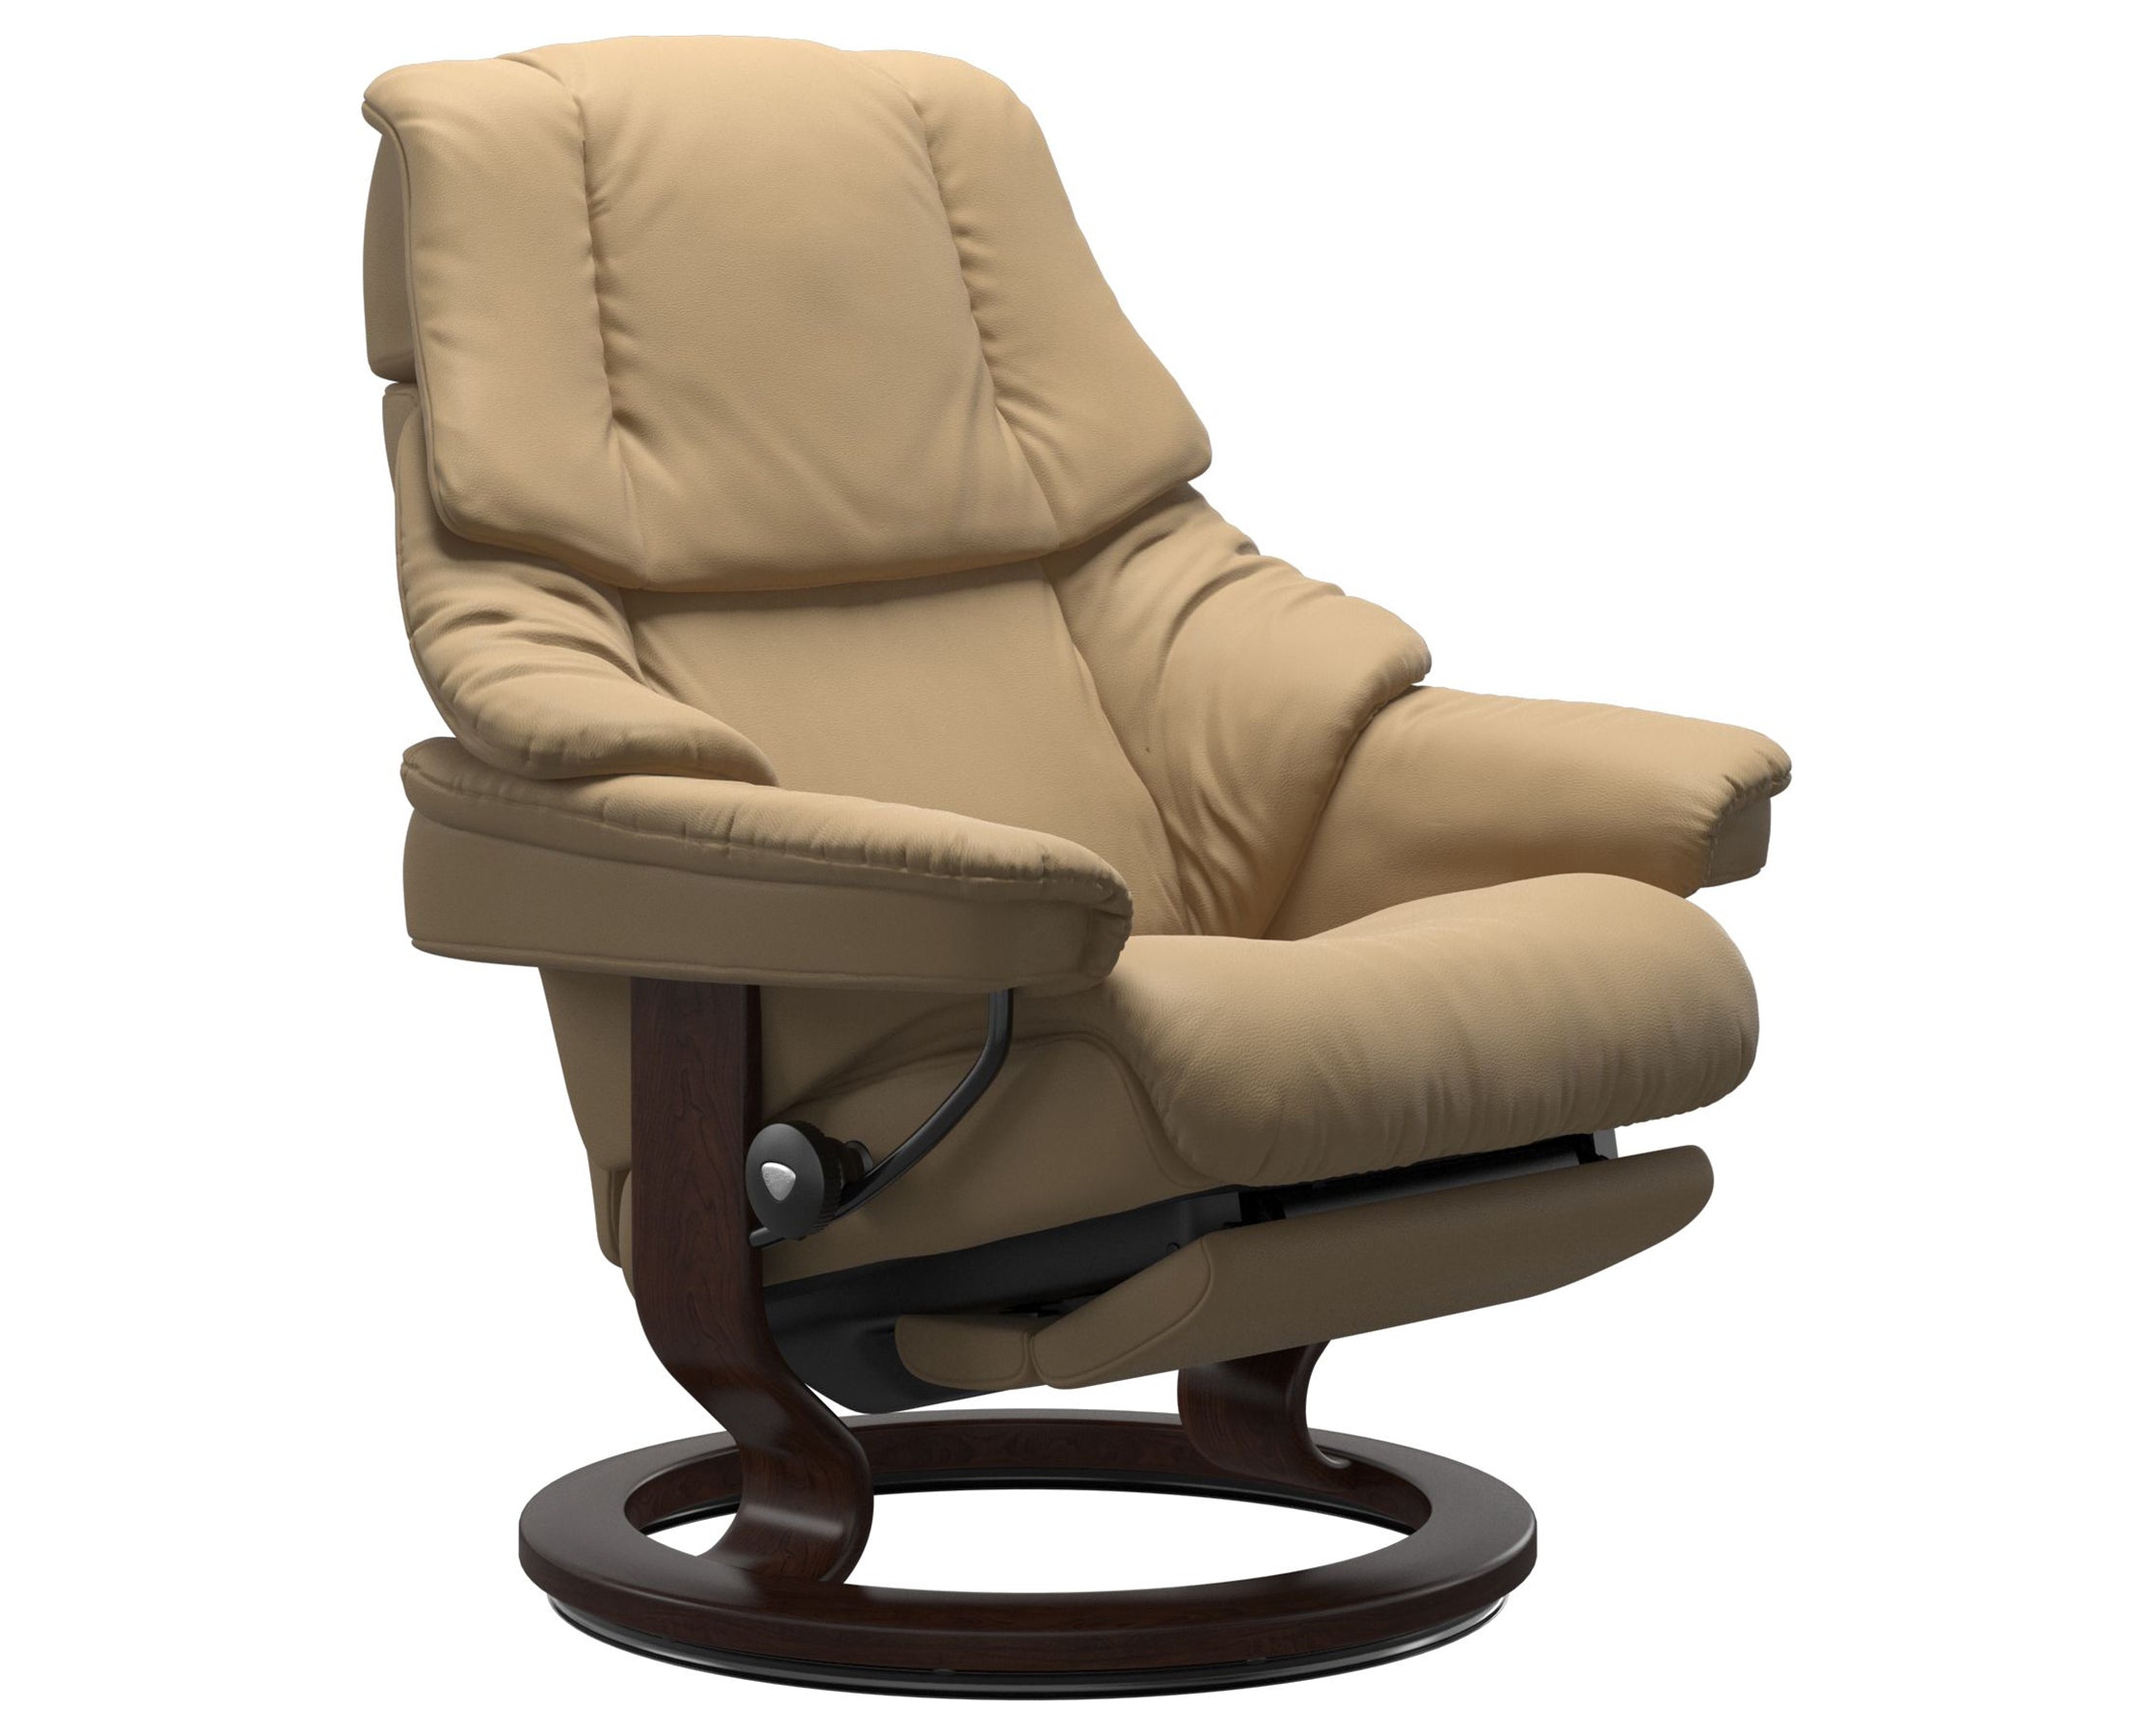 Paloma Leather Sand M/L & Brown Base | Stressless Reno Classic Power Recliner | Valley Ridge Furniture